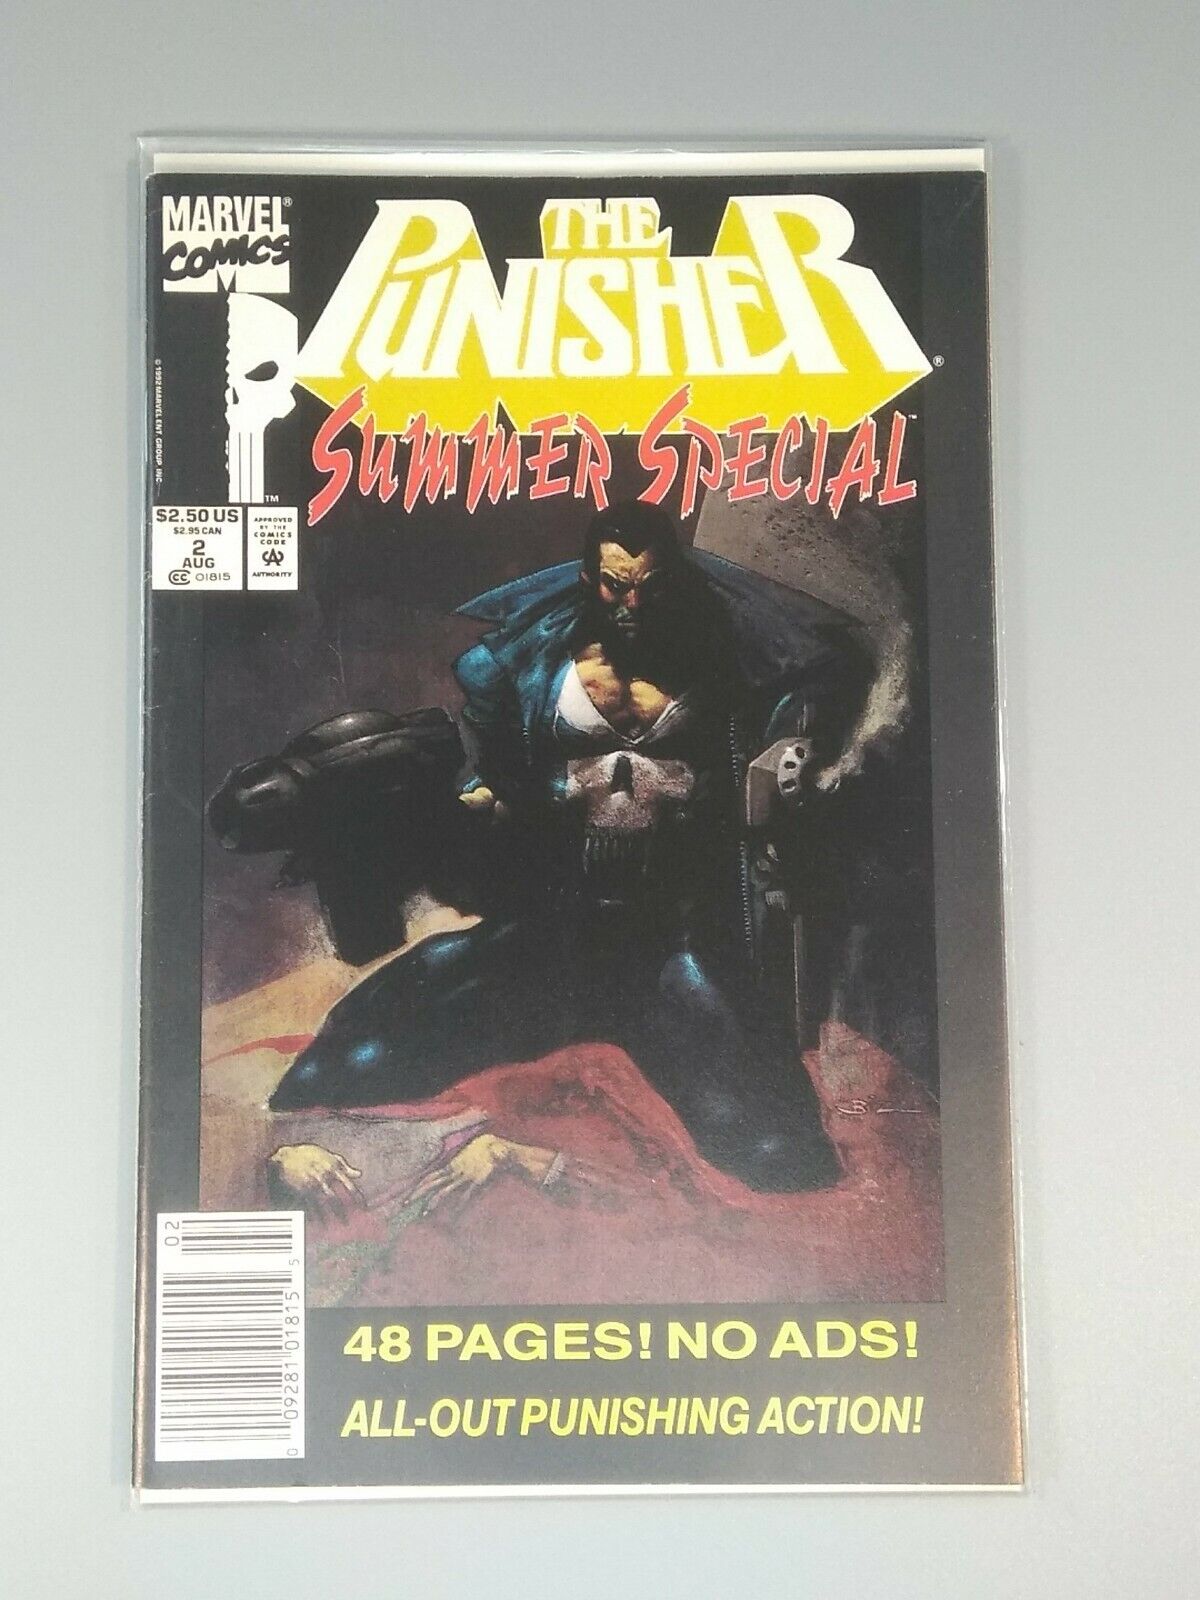 Vintage Aug 1992 The Punisher Summer Special #2 Marvel Comics Near Mint Sleeved